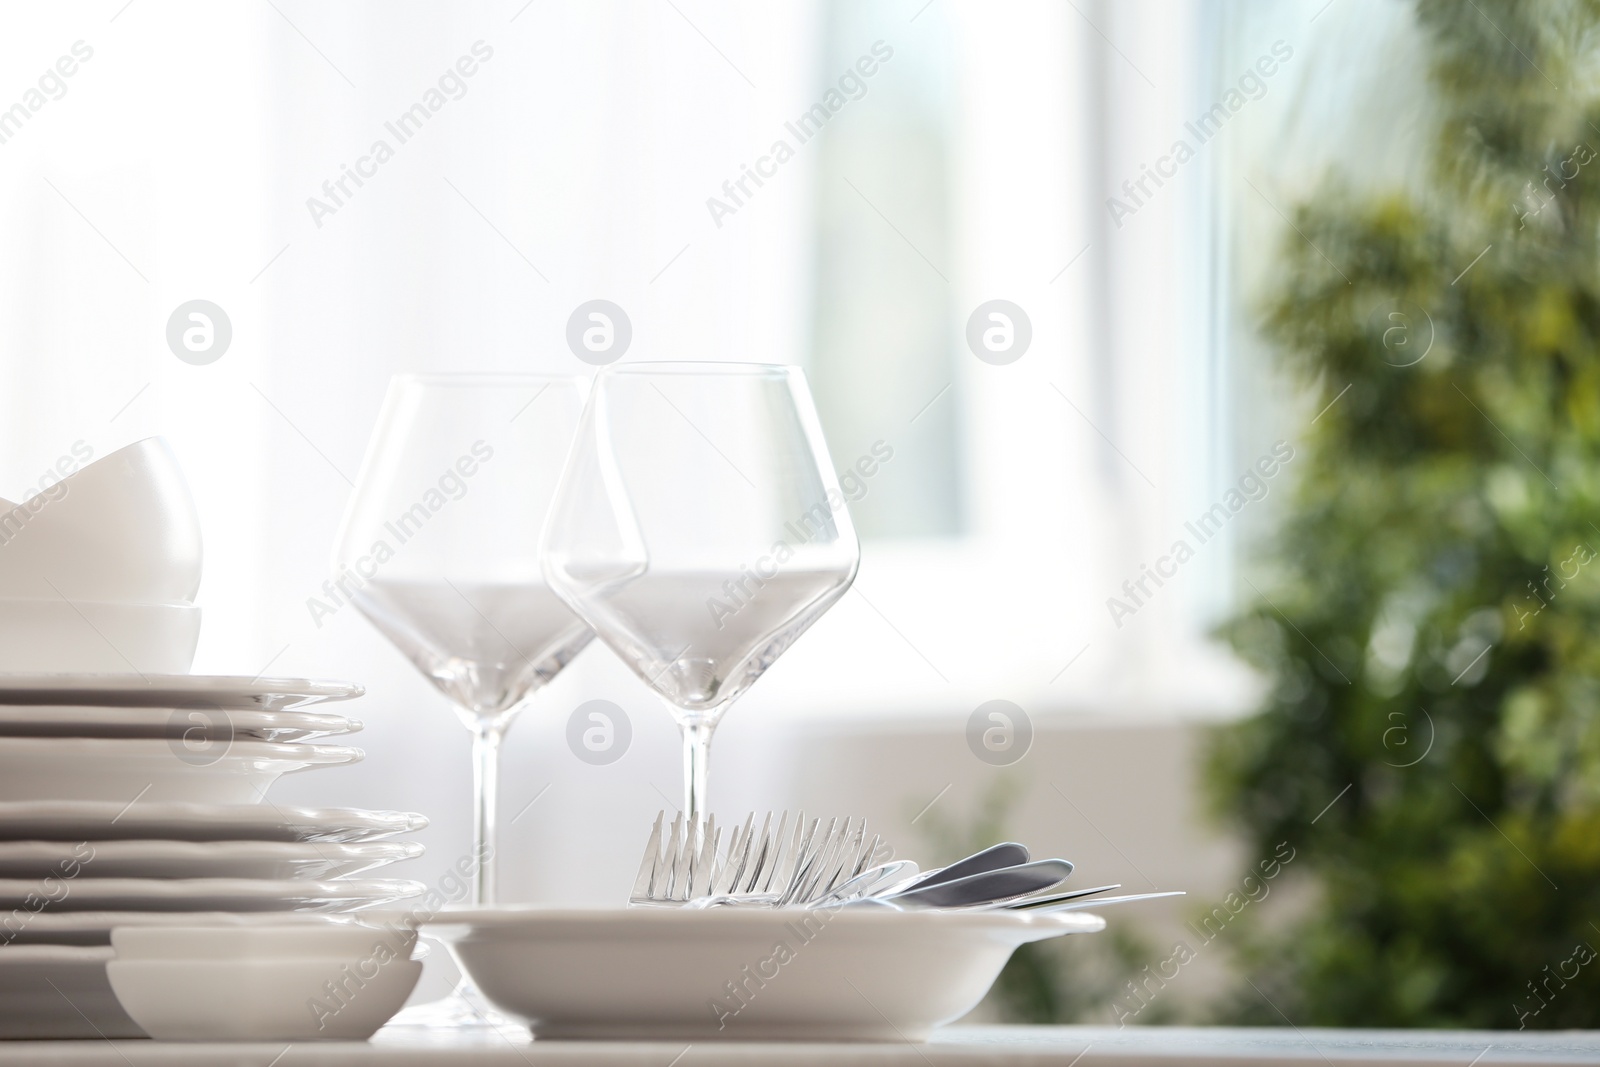 Photo of Set of clean dishware, cutlery and wineglasses on table indoors